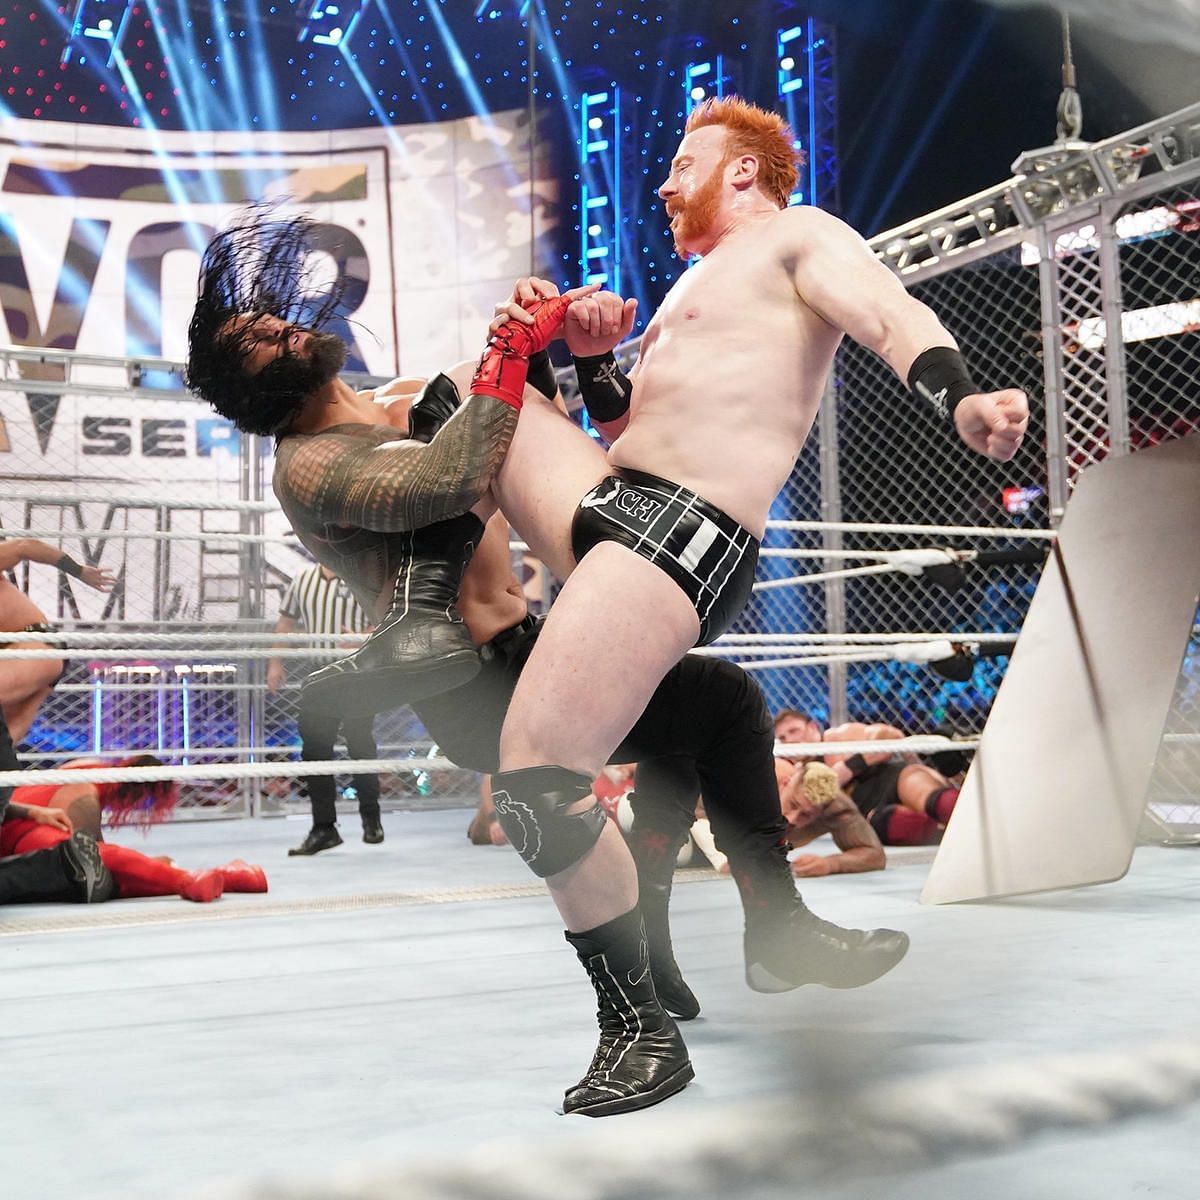 Sheamus and Roman Reigns have had their run-ins lately.